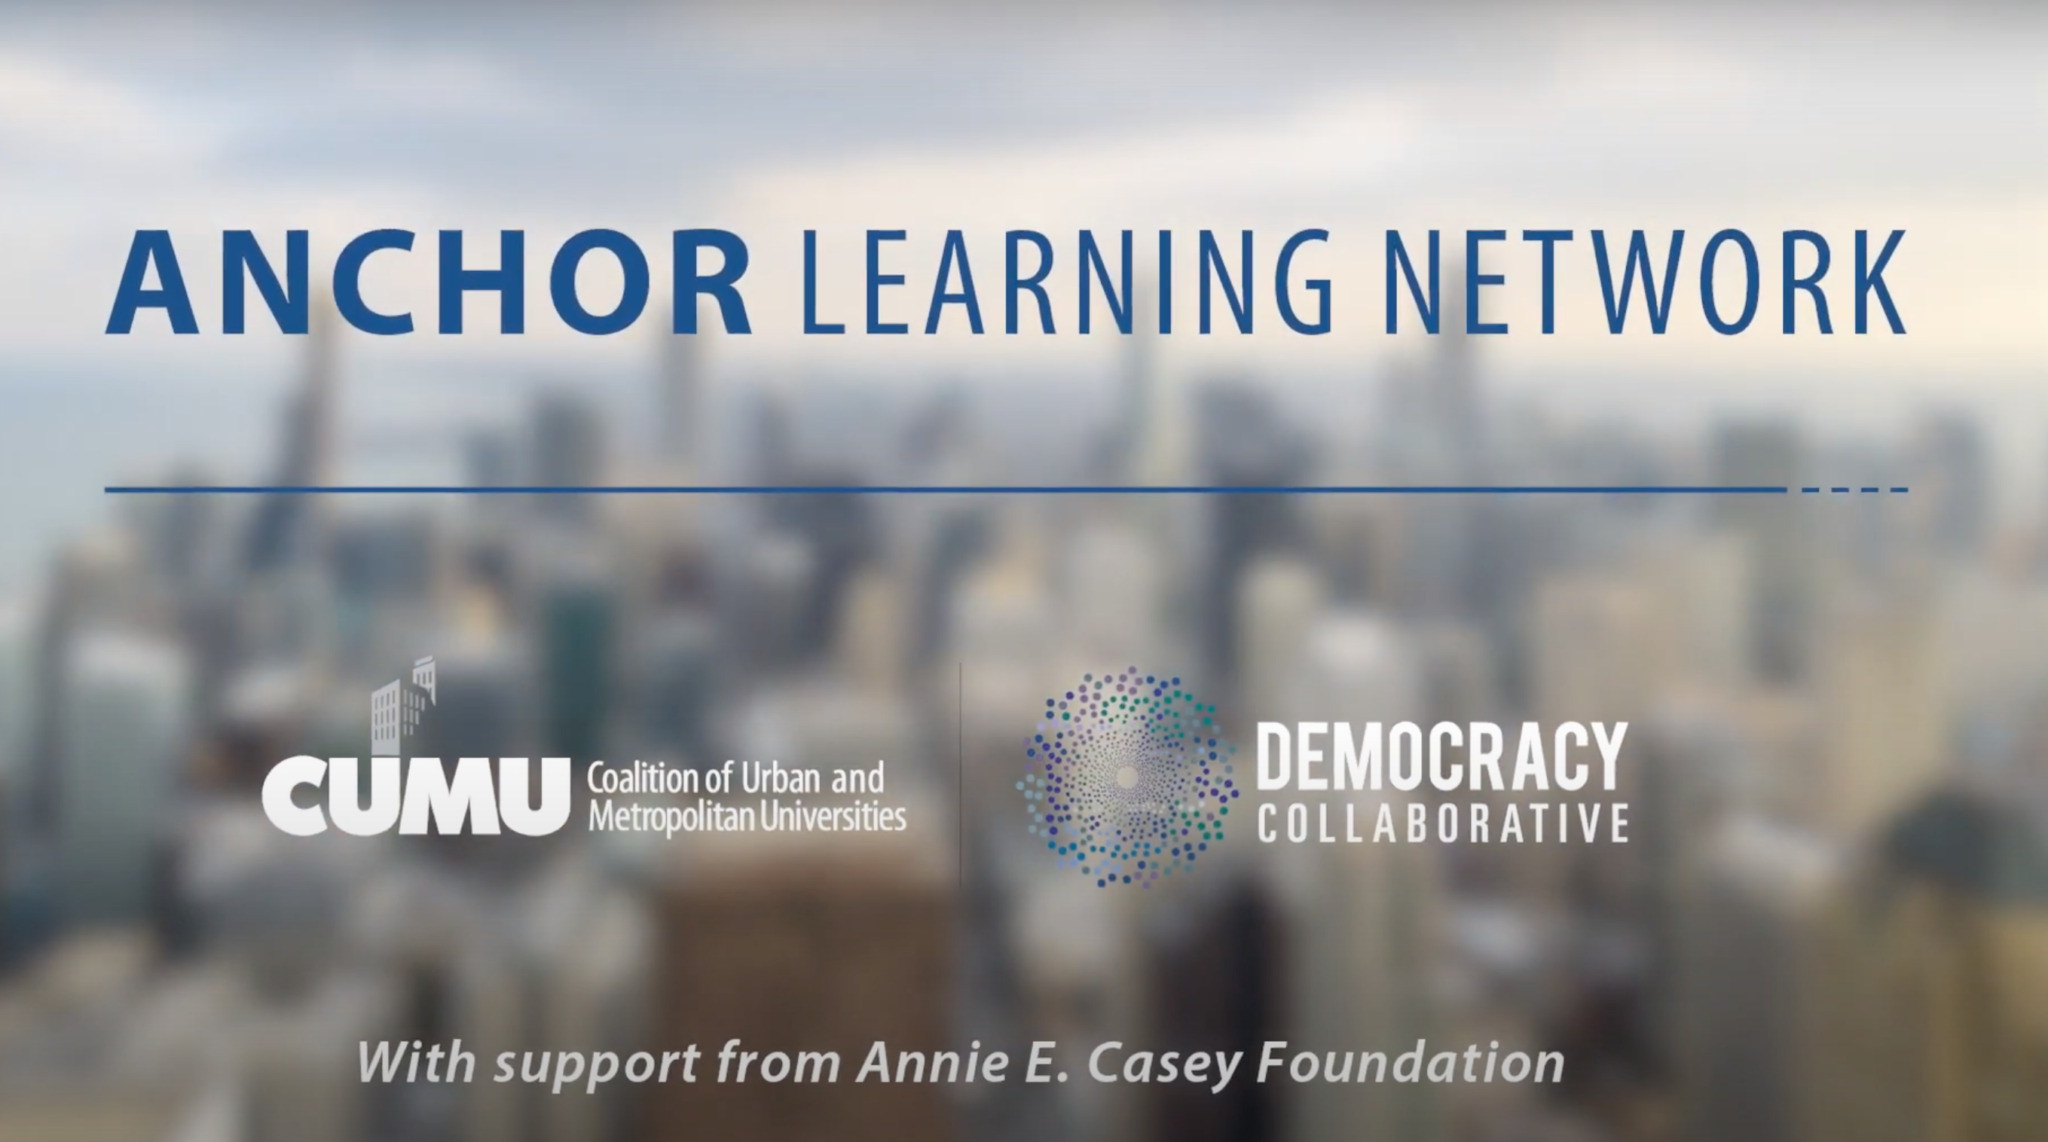 Video: The Anchor Learning Network